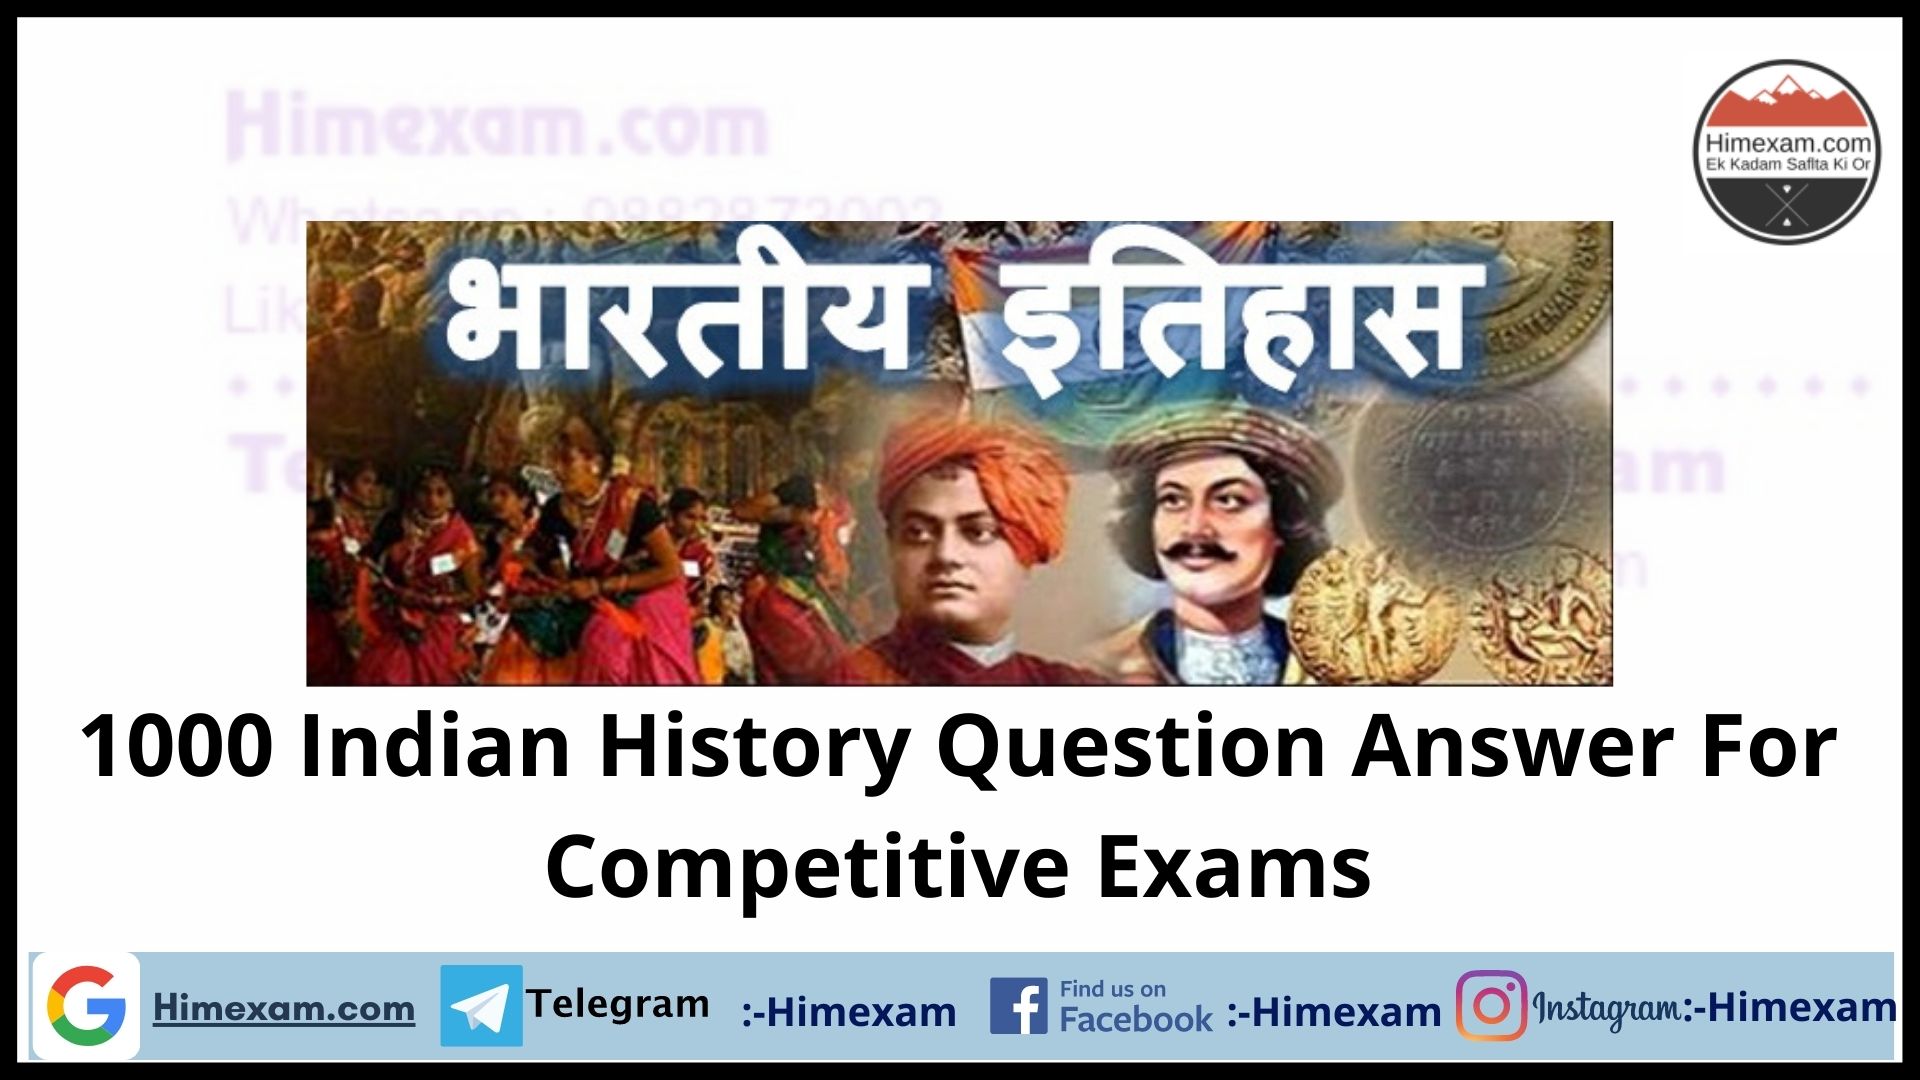 1000 Indian History Question Answer For Competitive Exams